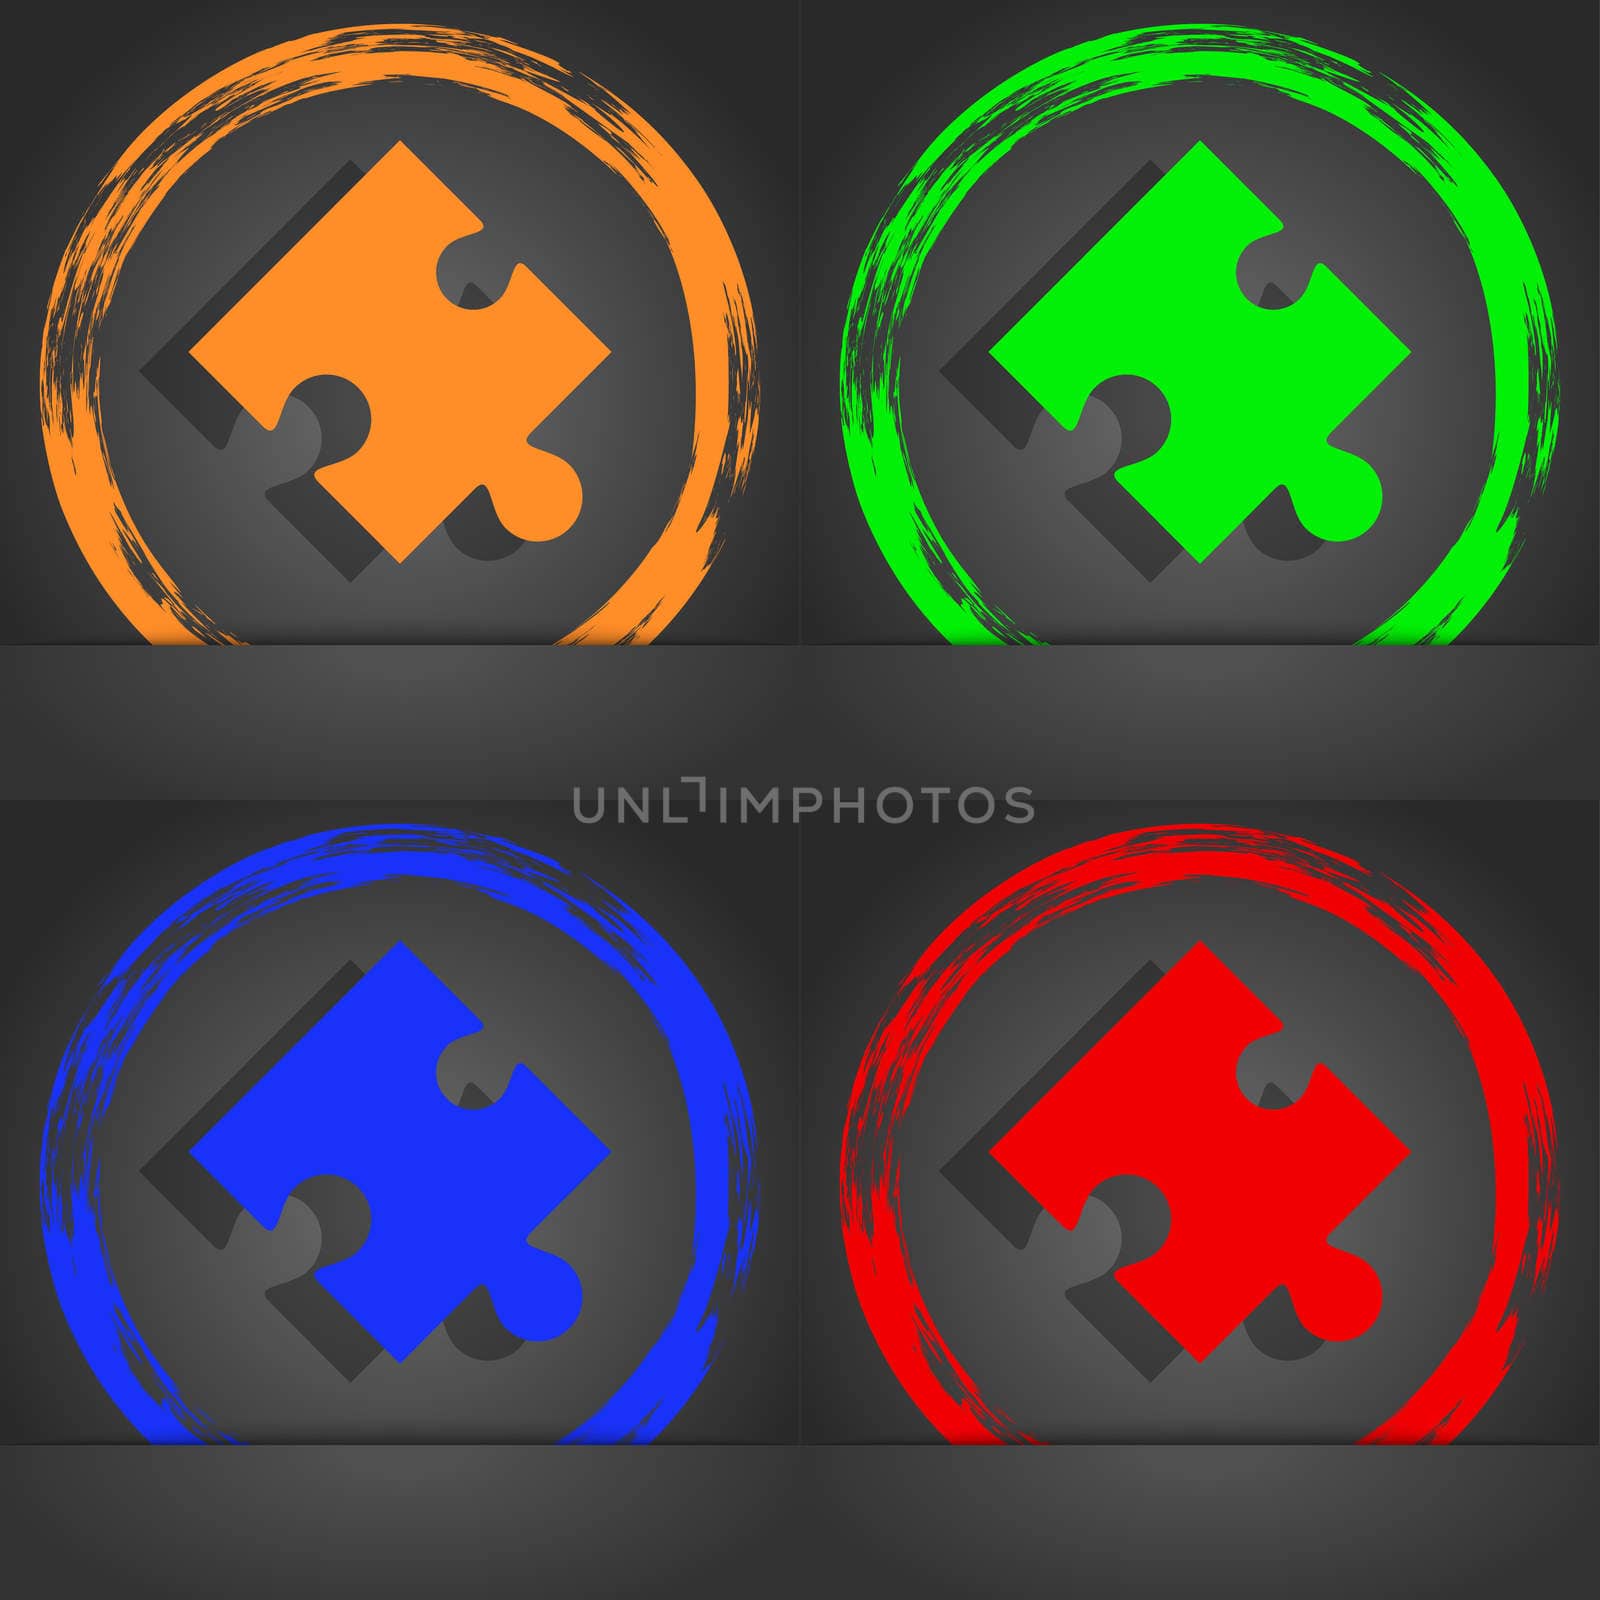 Puzzle piece icon sign. Fashionable modern style. In the orange, green, blue, red design. illustration